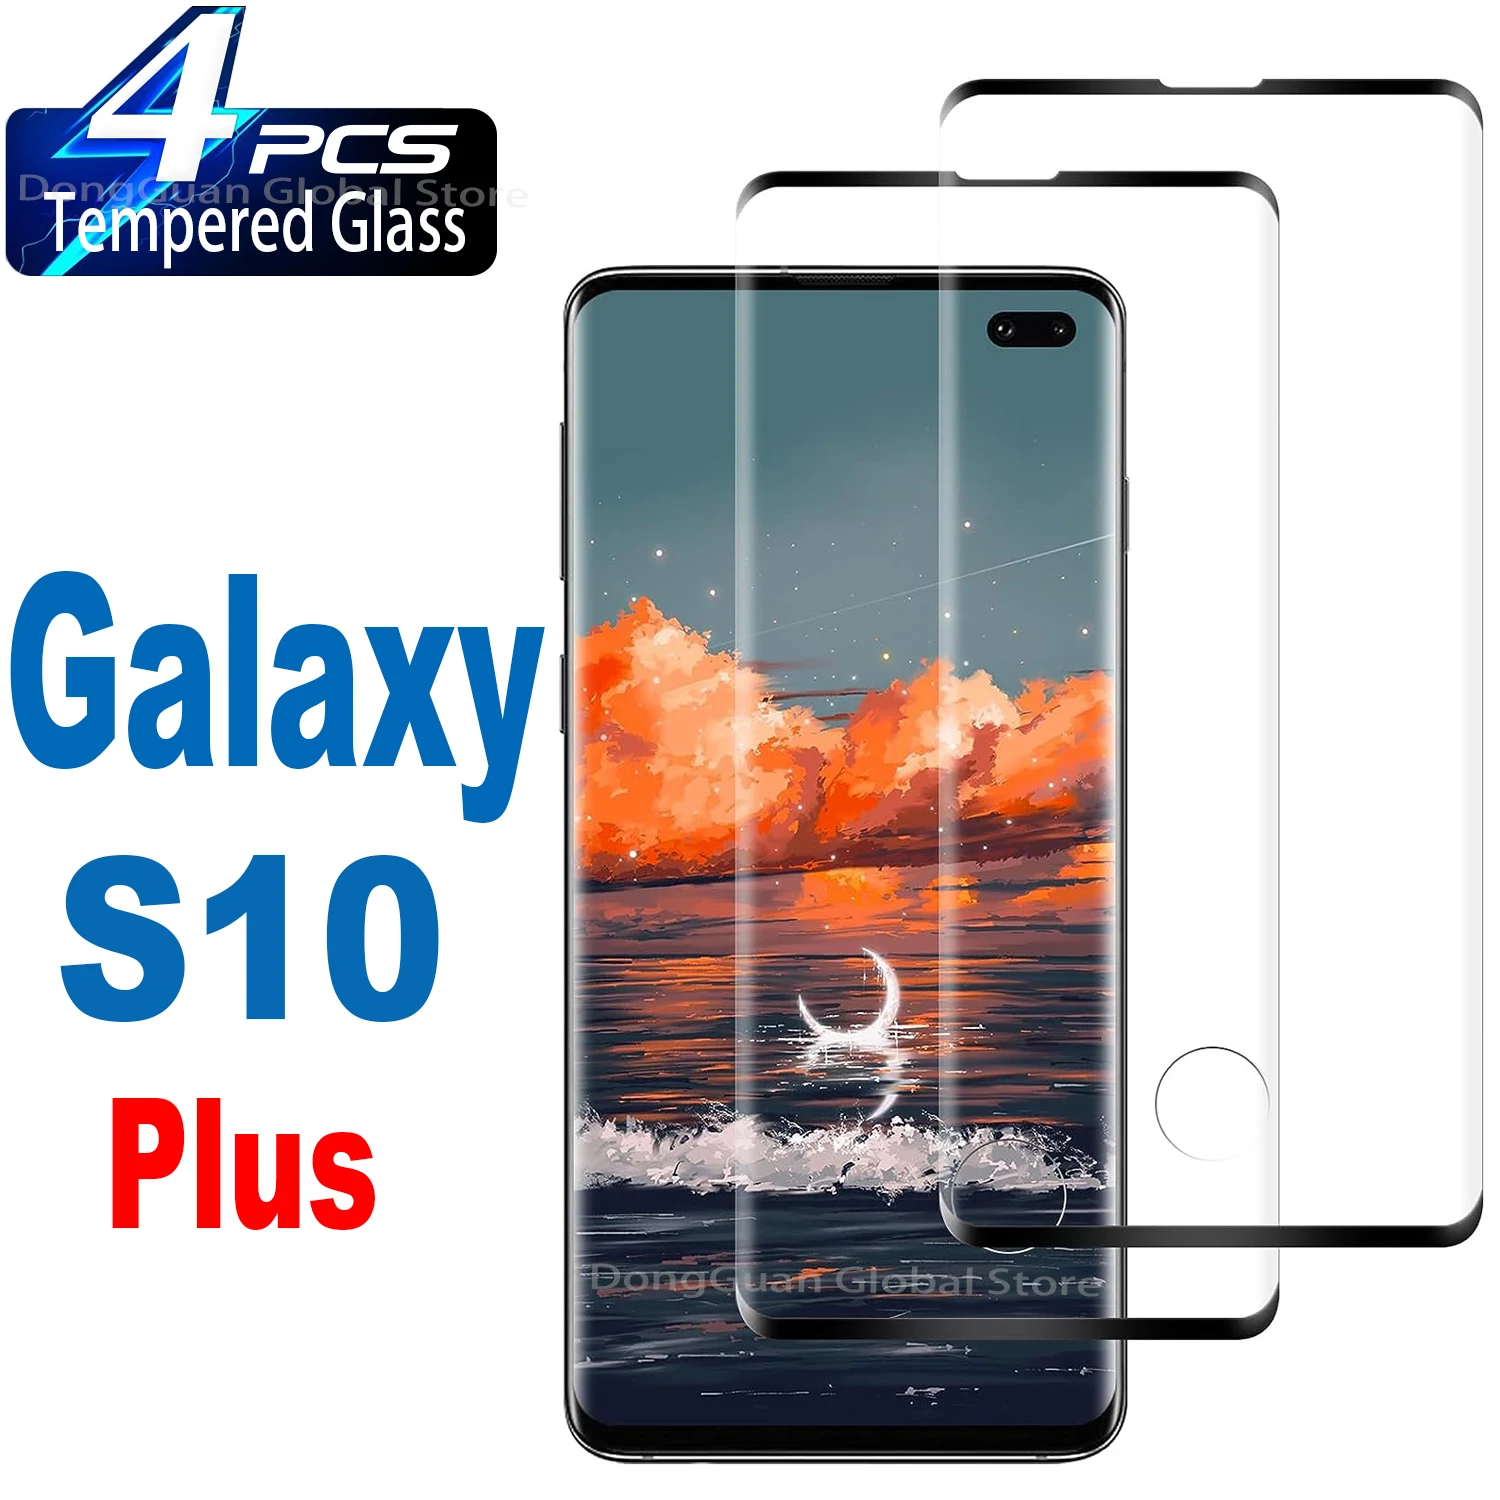 2/4Pcs Tempered Glass For Samsung Galaxy S10 Plus S10+ S20 S20+ Plus Screen Protector Glass 2pc hydrogel film for samsung s20 plus ultra not tempered glass on samsung galaxy s20 plus ultra hydrogel film screen protector